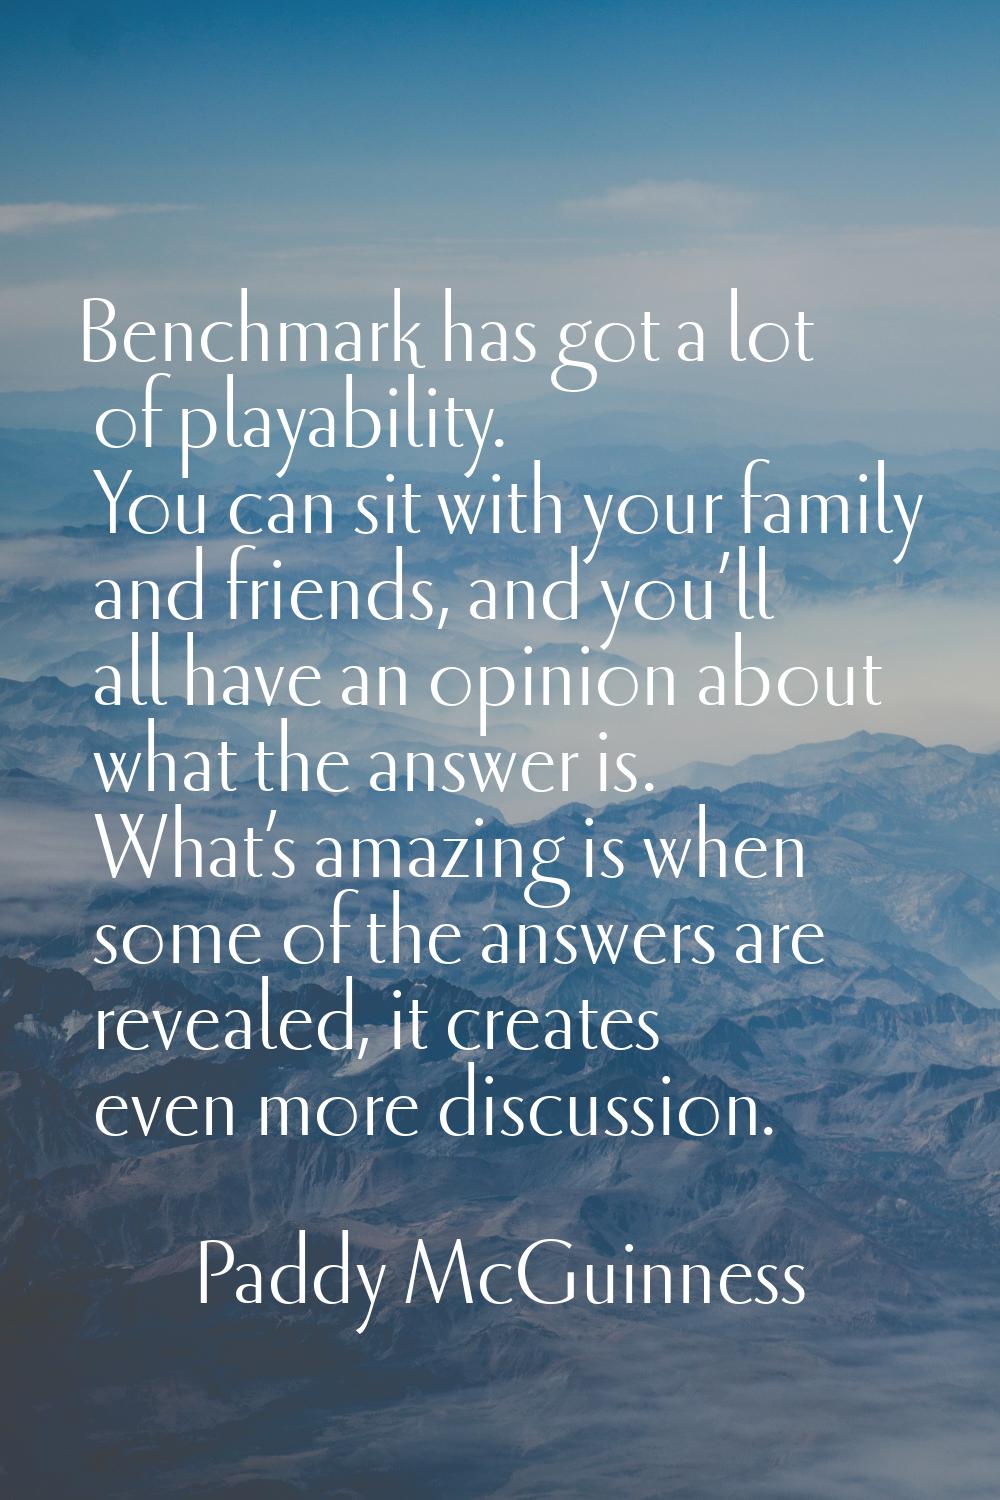 Benchmark has got a lot of playability. You can sit with your family and friends, and you’ll all ha